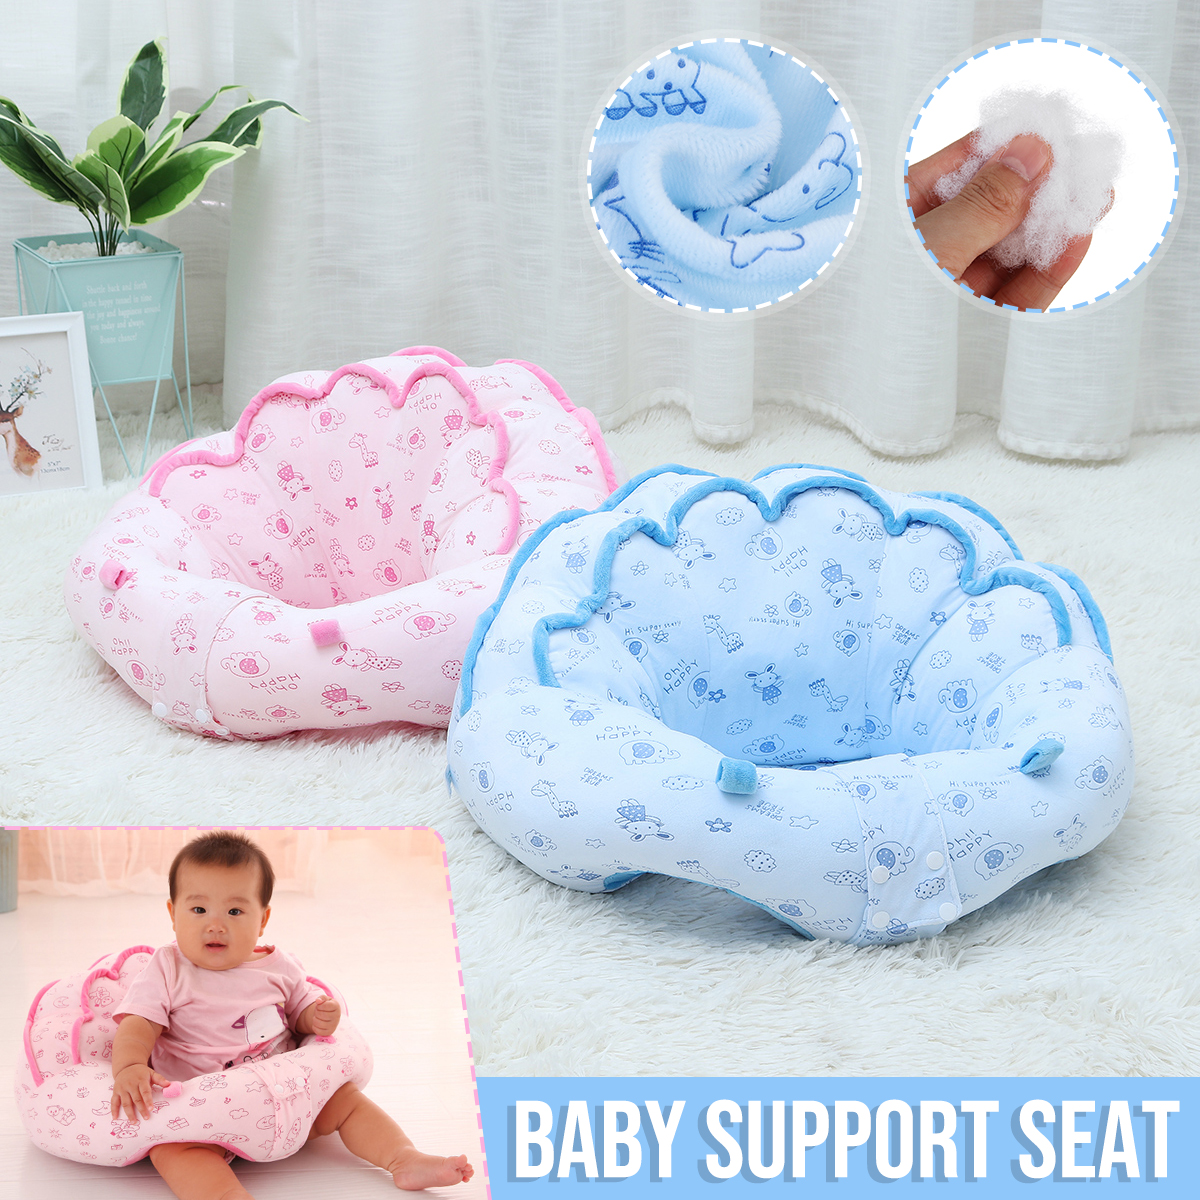 Blue-Pink-Color-Kids-Baby-360deg-Comfortable-Support-Seat-Plush-Sofa-Learning-To-Sit-Chair-Cushion-T-1887110-2